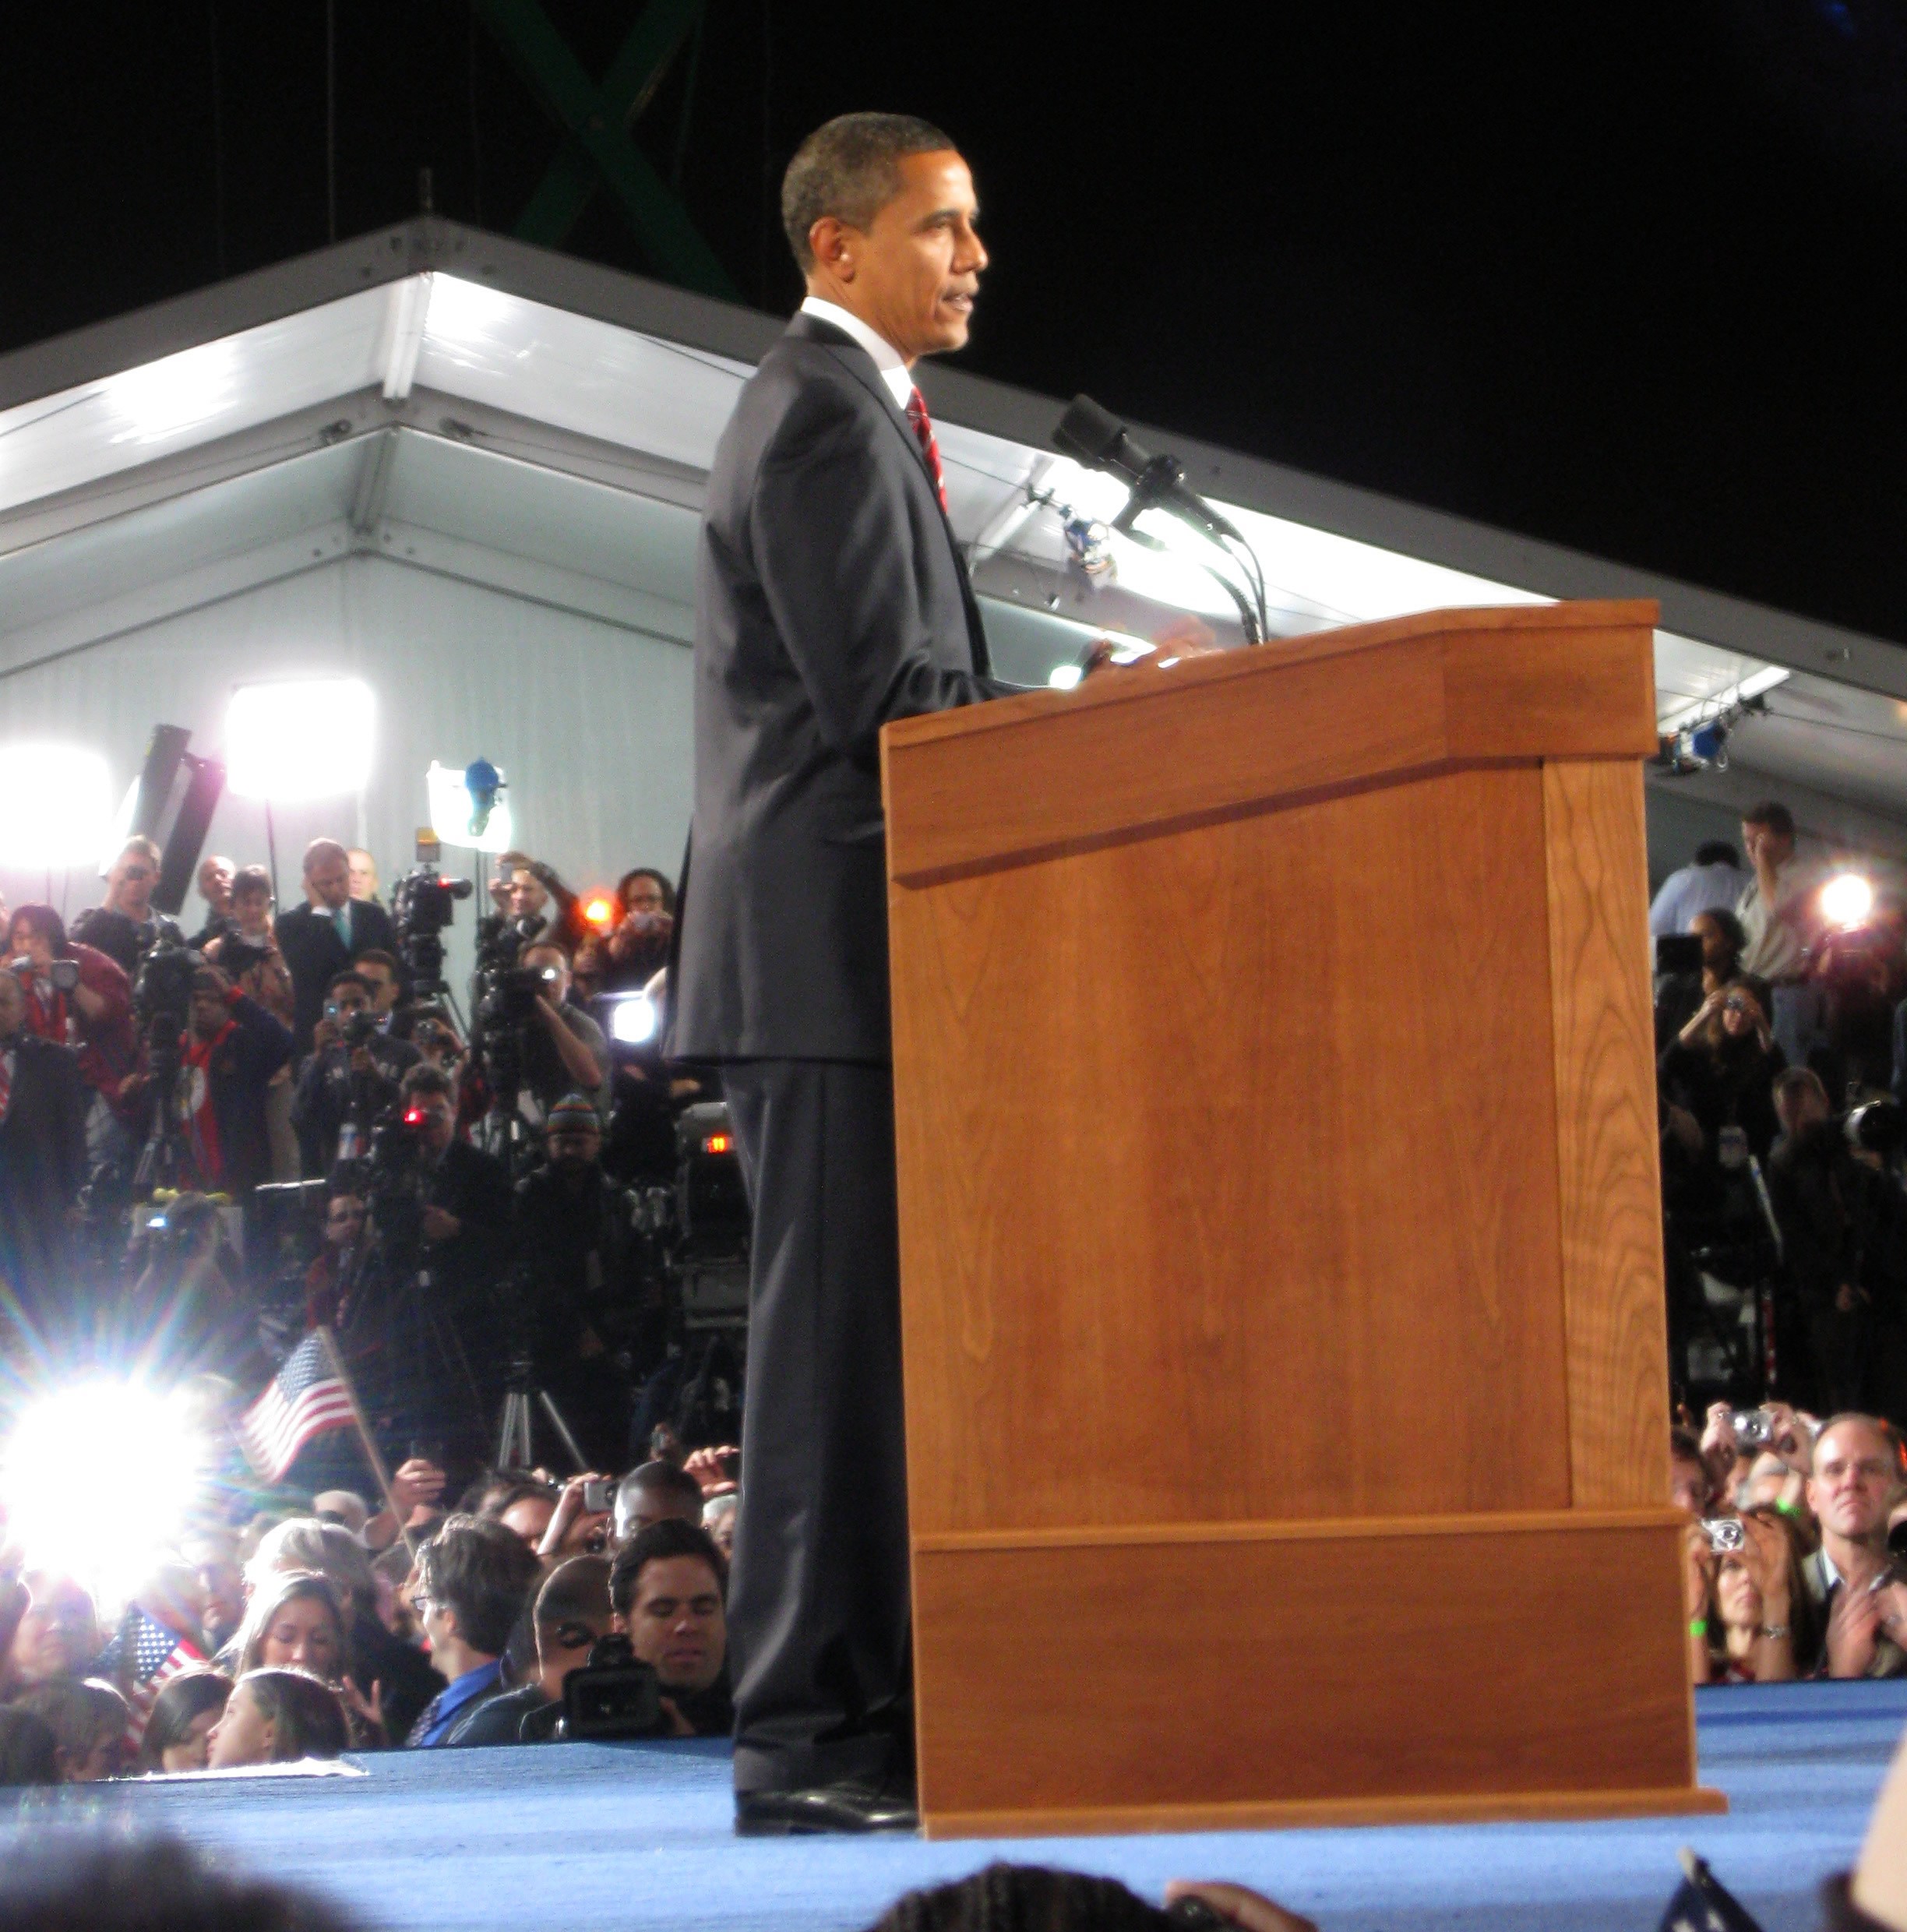 rhetorical devices used in obama's victory speech 2008